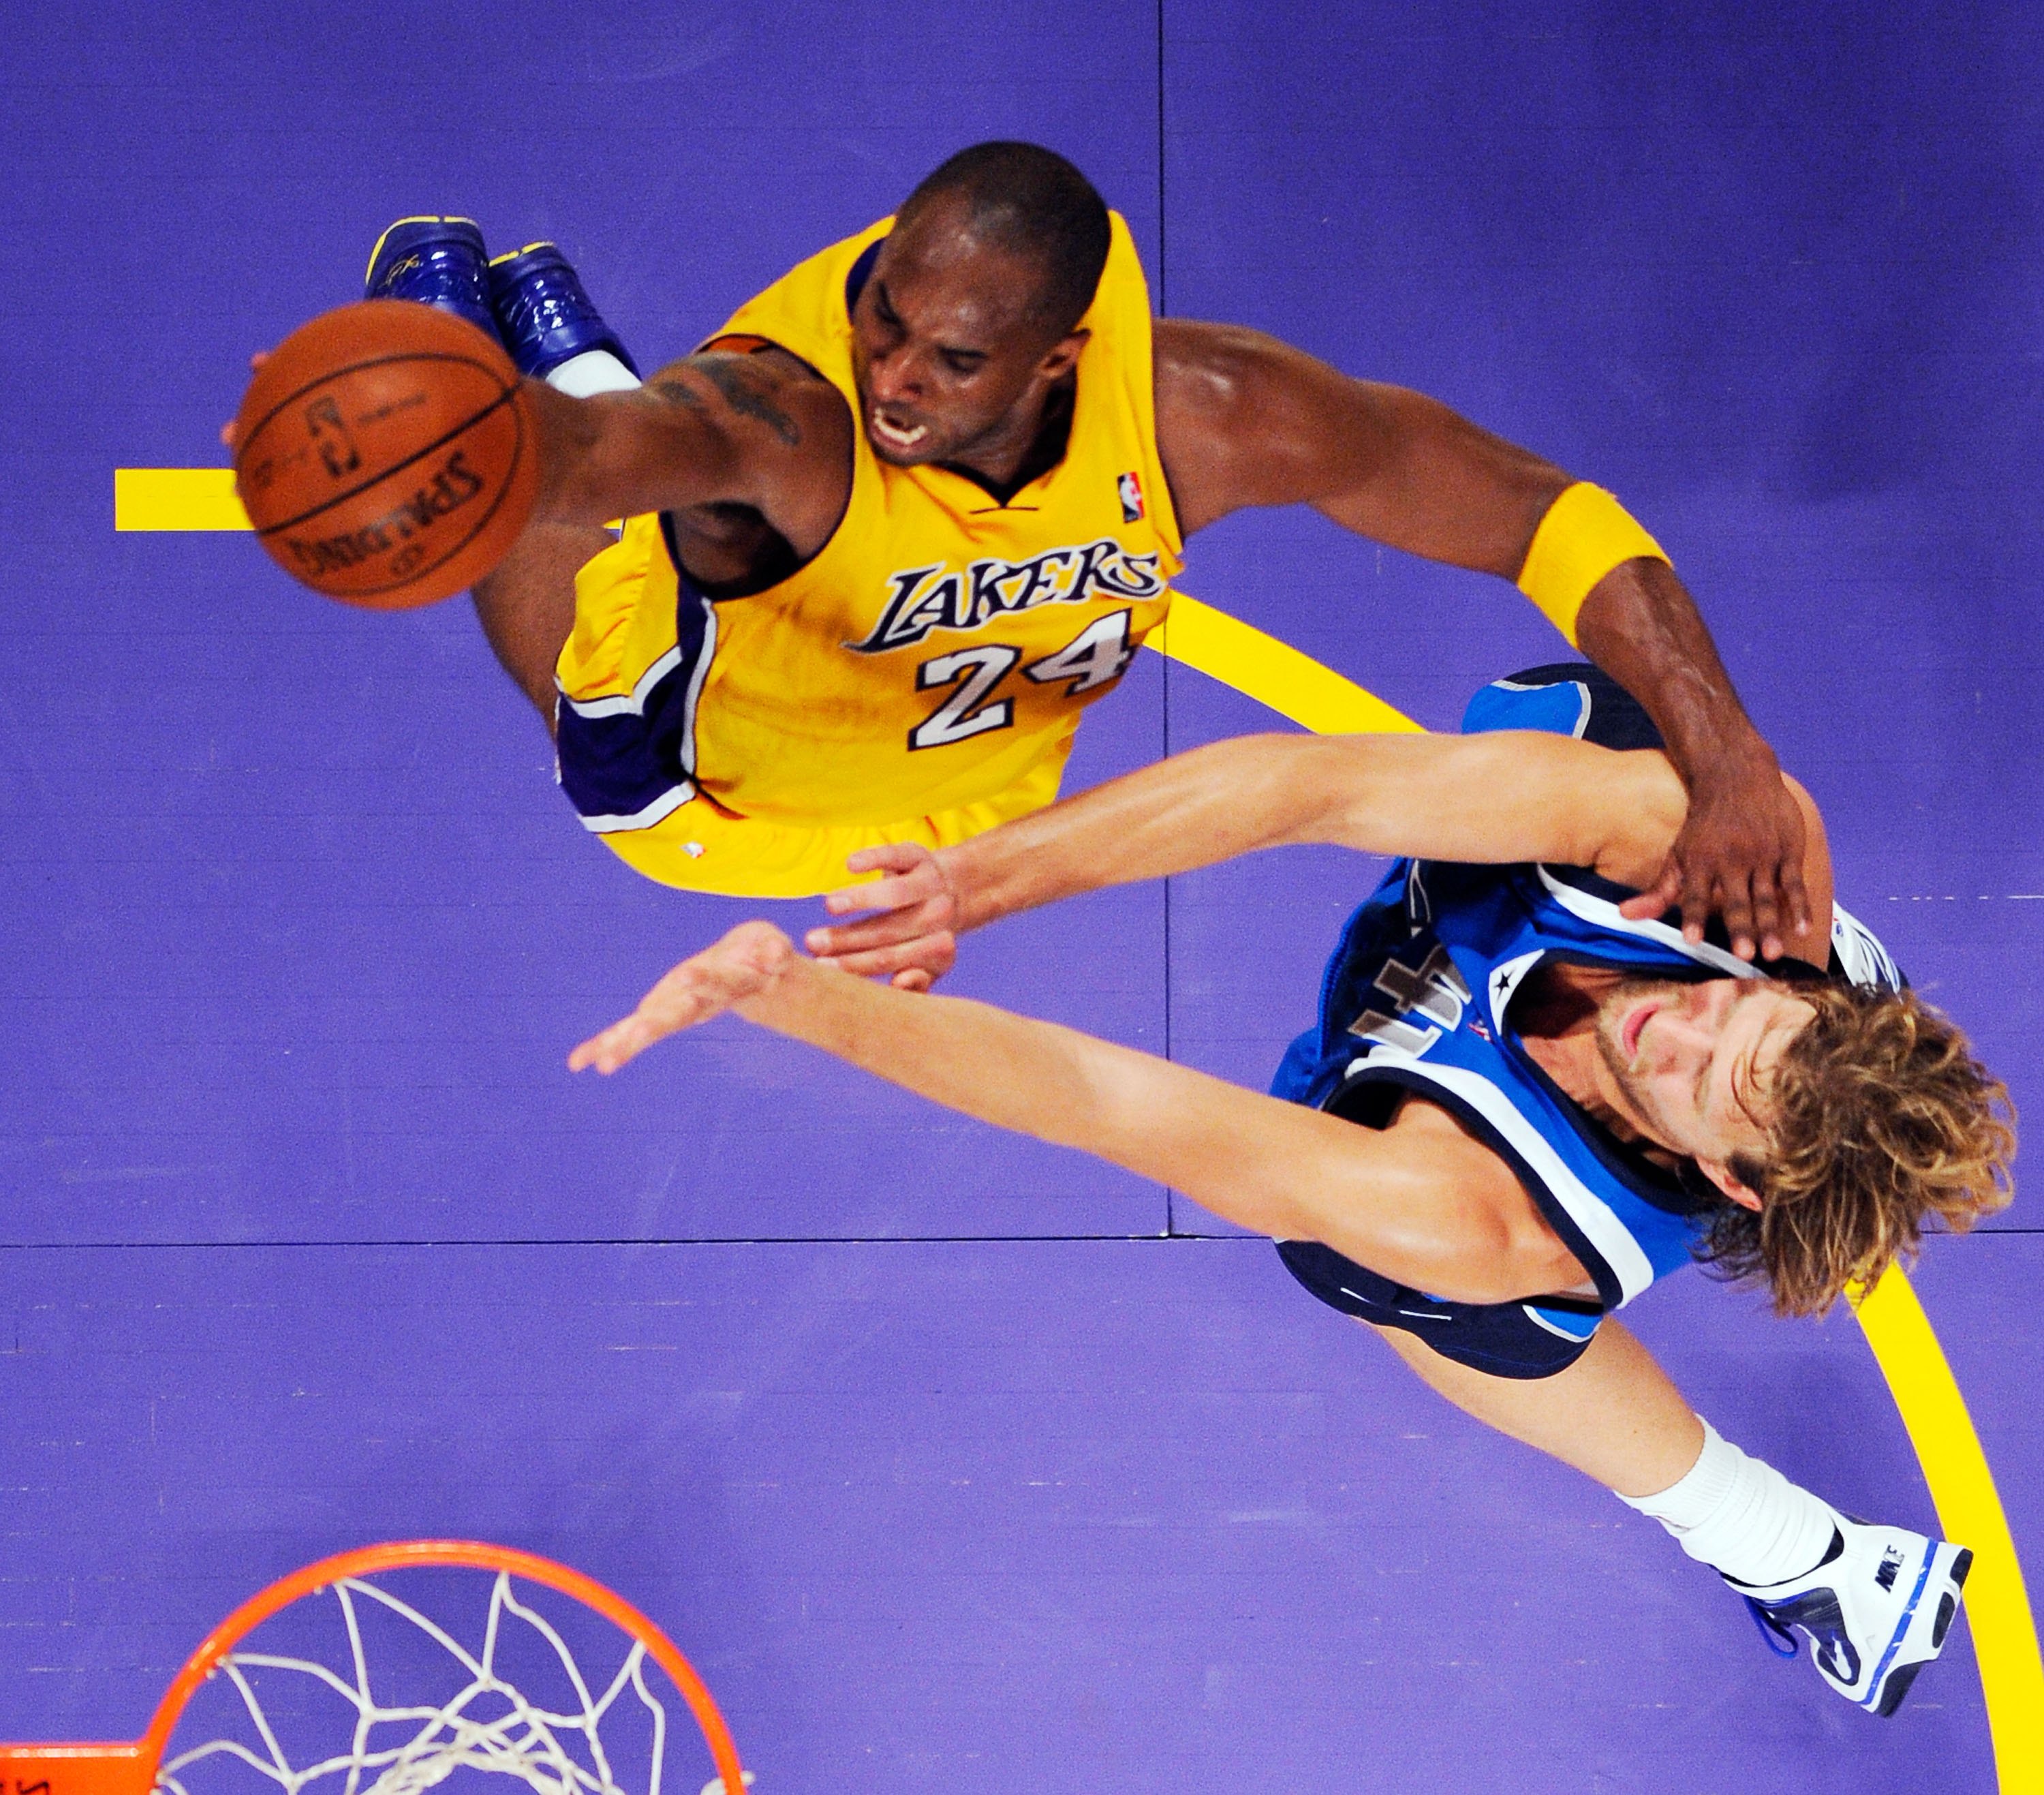 LOS ANGELES, CA - OCTOBER 30: Kobe Bryant #24 of the Los Angeles Lakers glides to the basket against Dirk Nowitzki #41 of the Dallas Mavericks during the NBA basketball game at Staples Center on October 30, 2009 in Los Angeles, California.  NOTE TO USER: